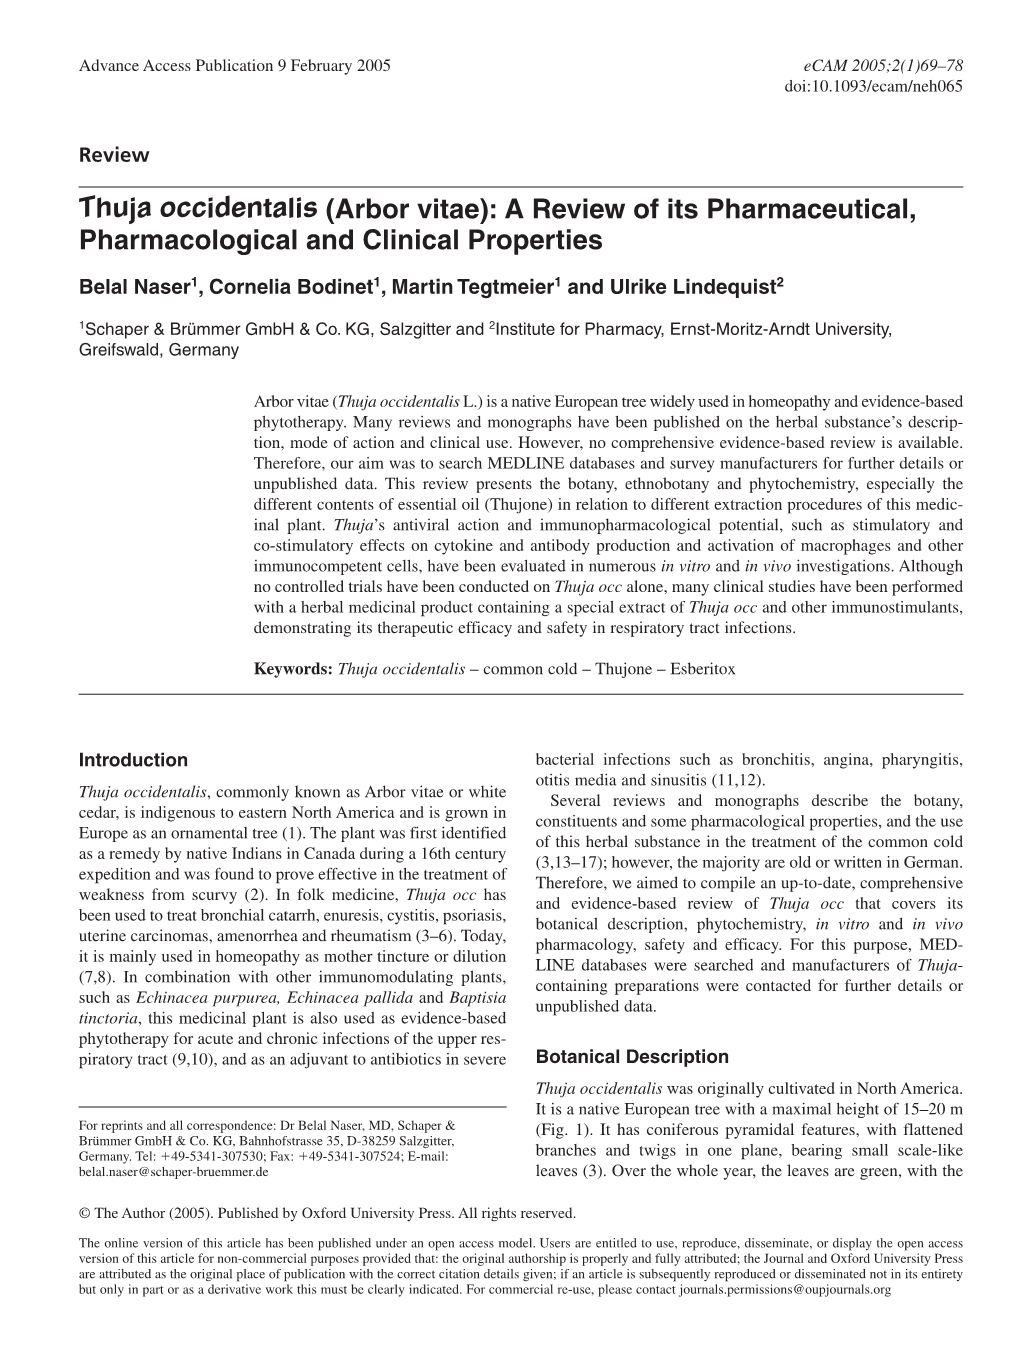 Thuja Occidentalis (Arbor Vitae): a Review of Its Pharmaceutical, Pharmacological and Clinical Properties